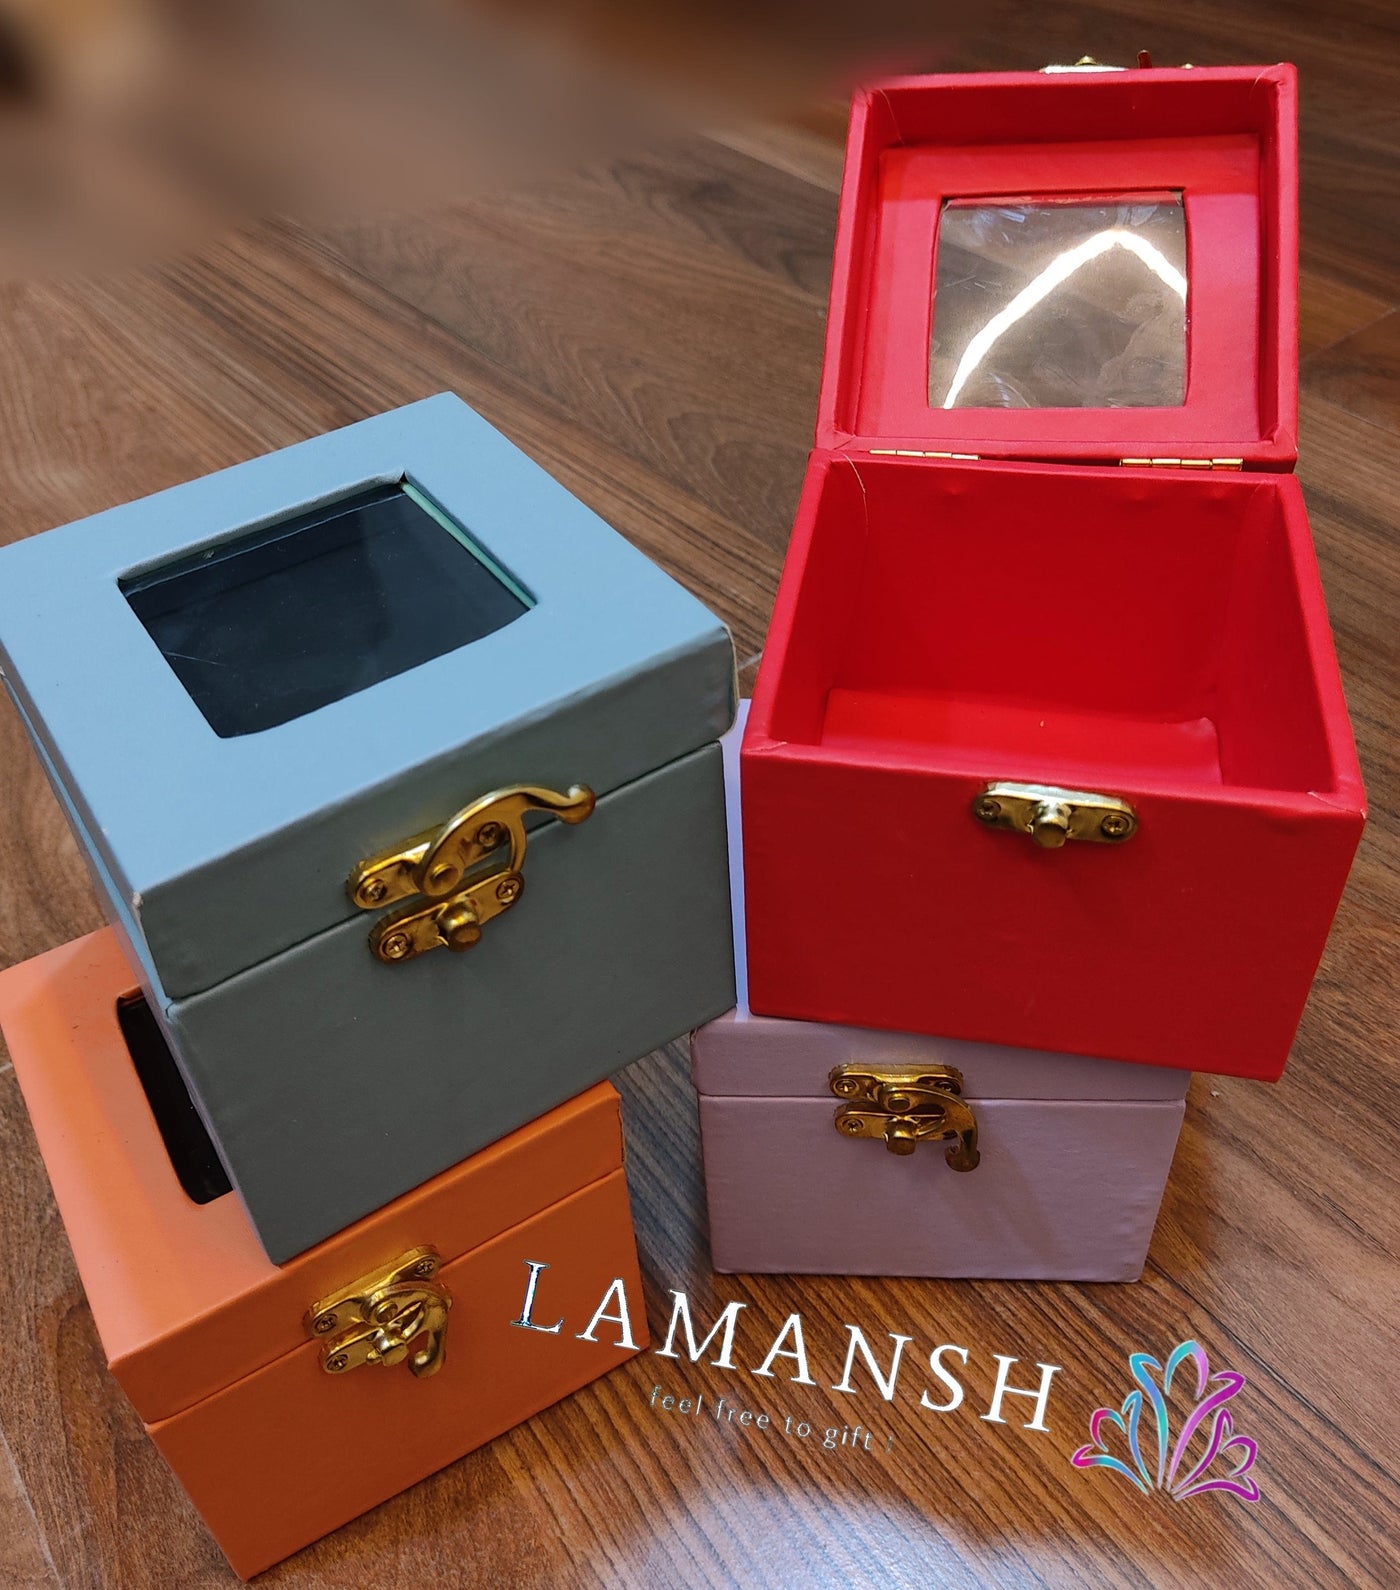 90 Rs each on Purchasing in bulk (50+ qty)📱at 8619550223 leatherite boxes LAMANSH 4*4*3.5 inch Mini Trunk Boxes with Window for Making Return Gift Hampers | Festival Birthday & Anniversary Gift 🎁 hampers & Wedding Favors